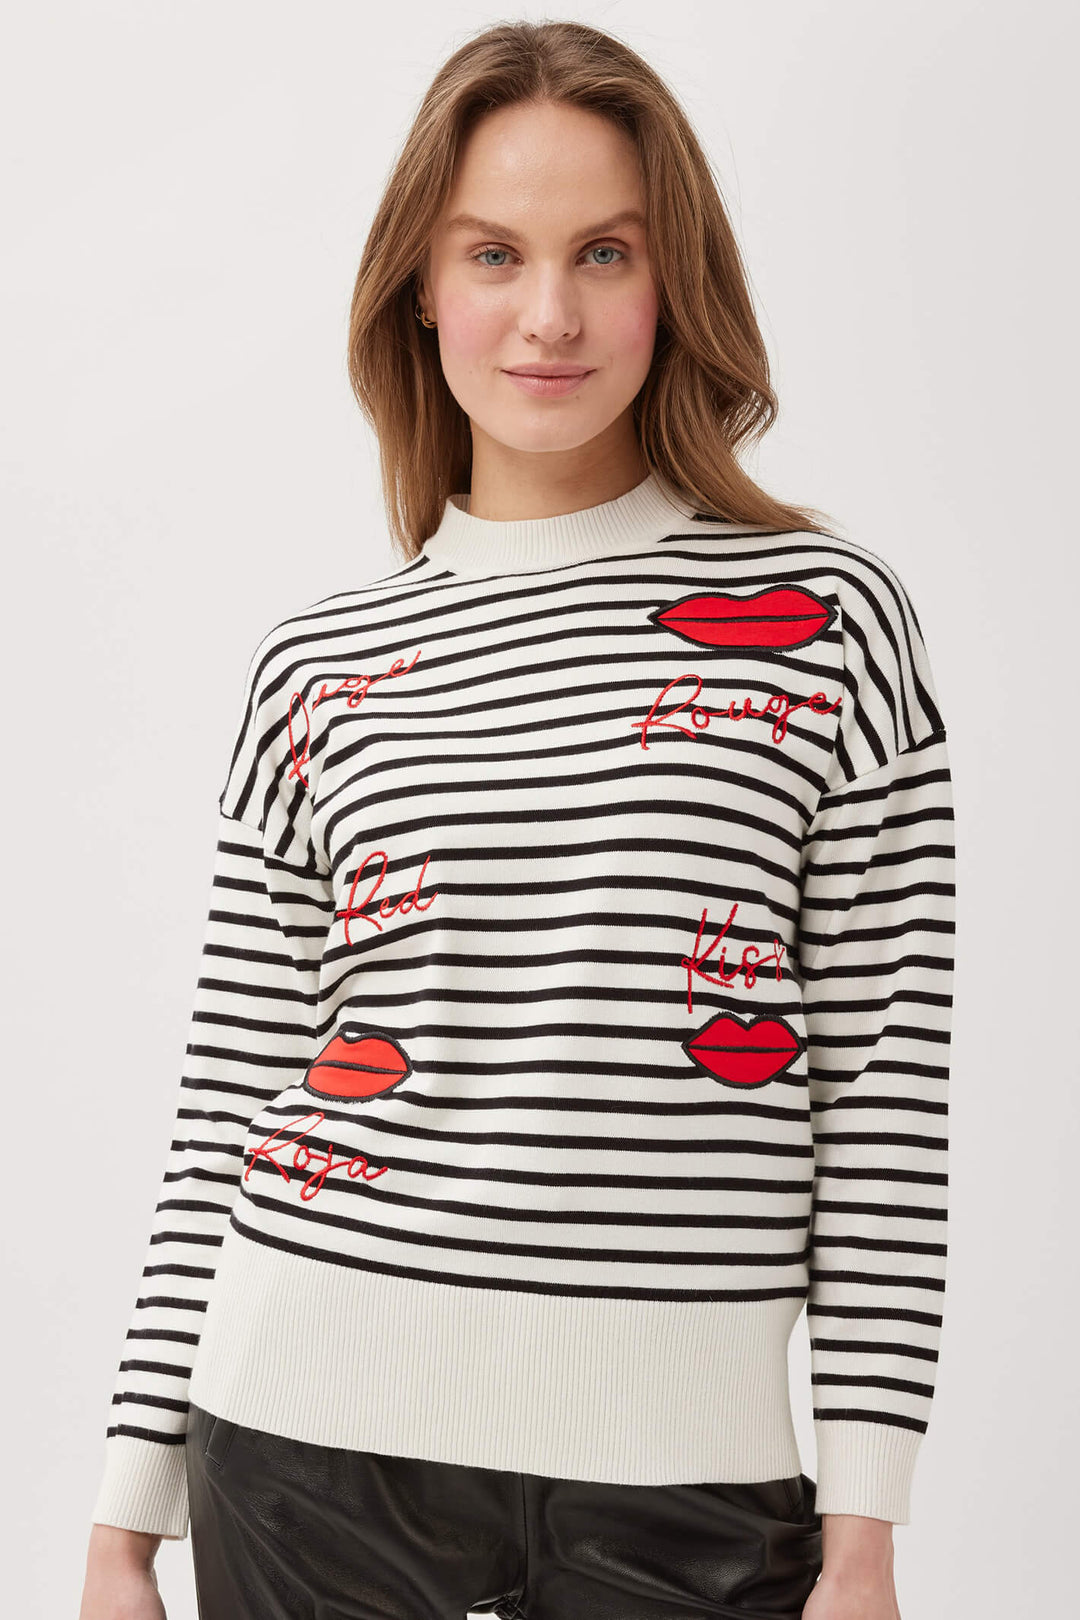 Leo & Ugo AW324 Off White Stripe Red Kisses Jumper - Experience Boutique